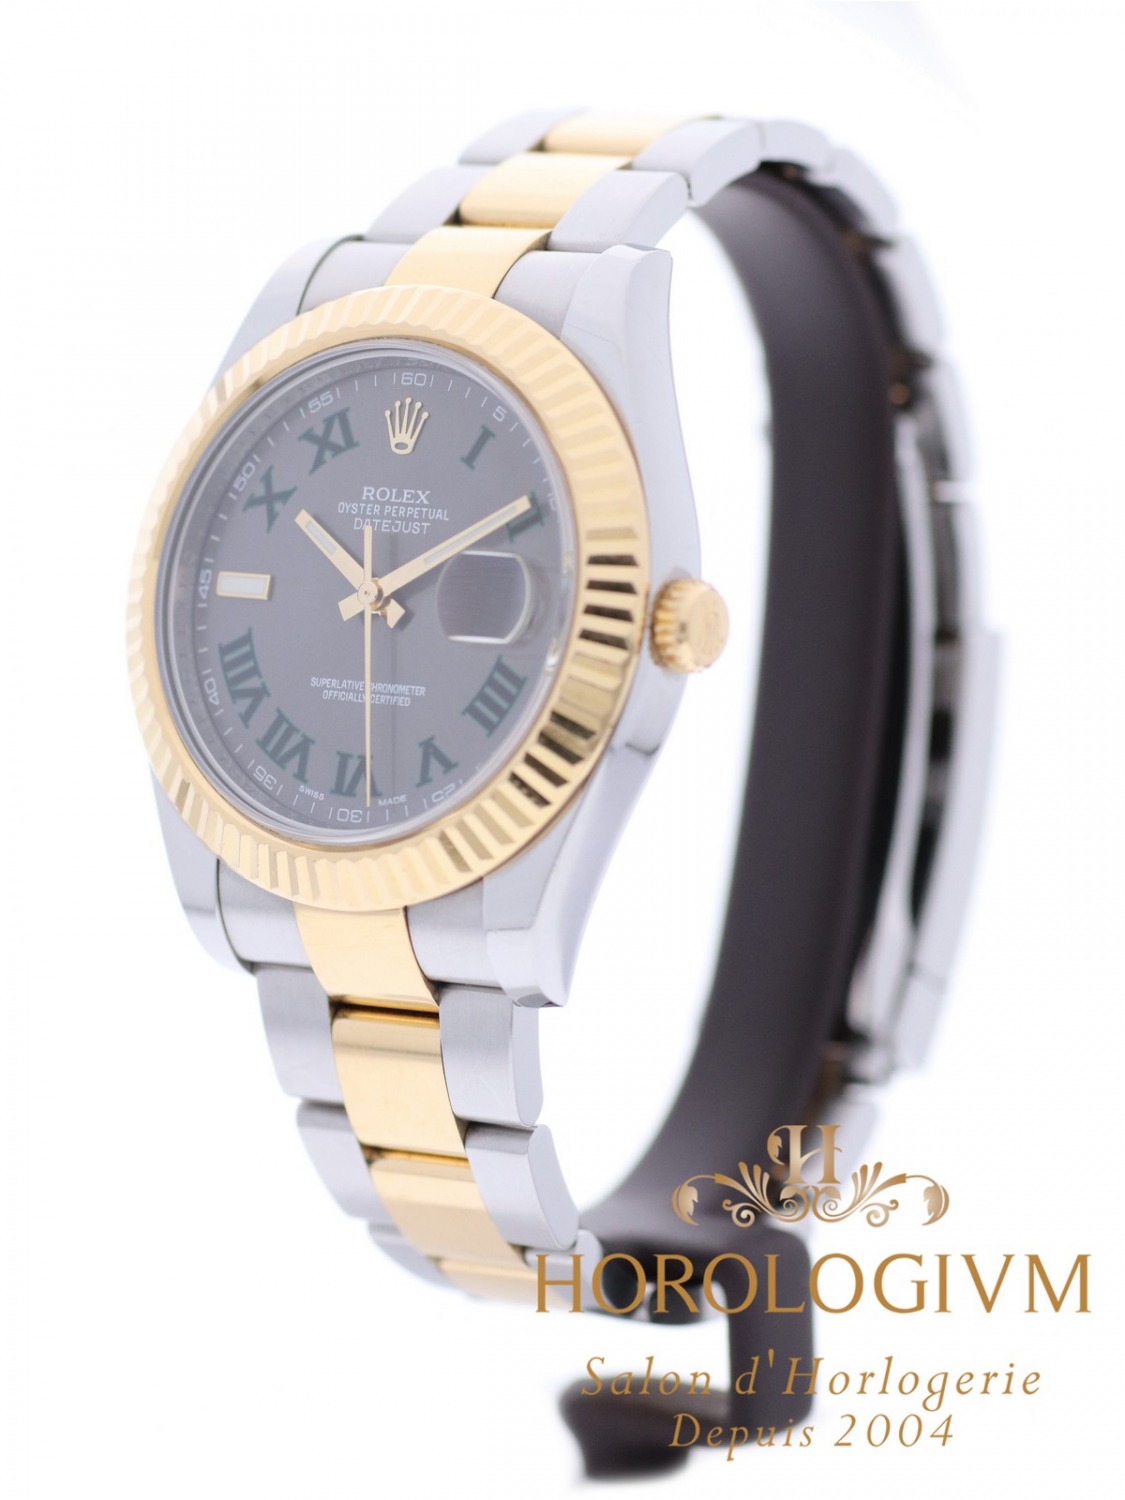 Rolex Datejust II Two-Tone 41 MM “Wimbledon Dial” watch, two-tone (bi-colored) silver and yellow gold